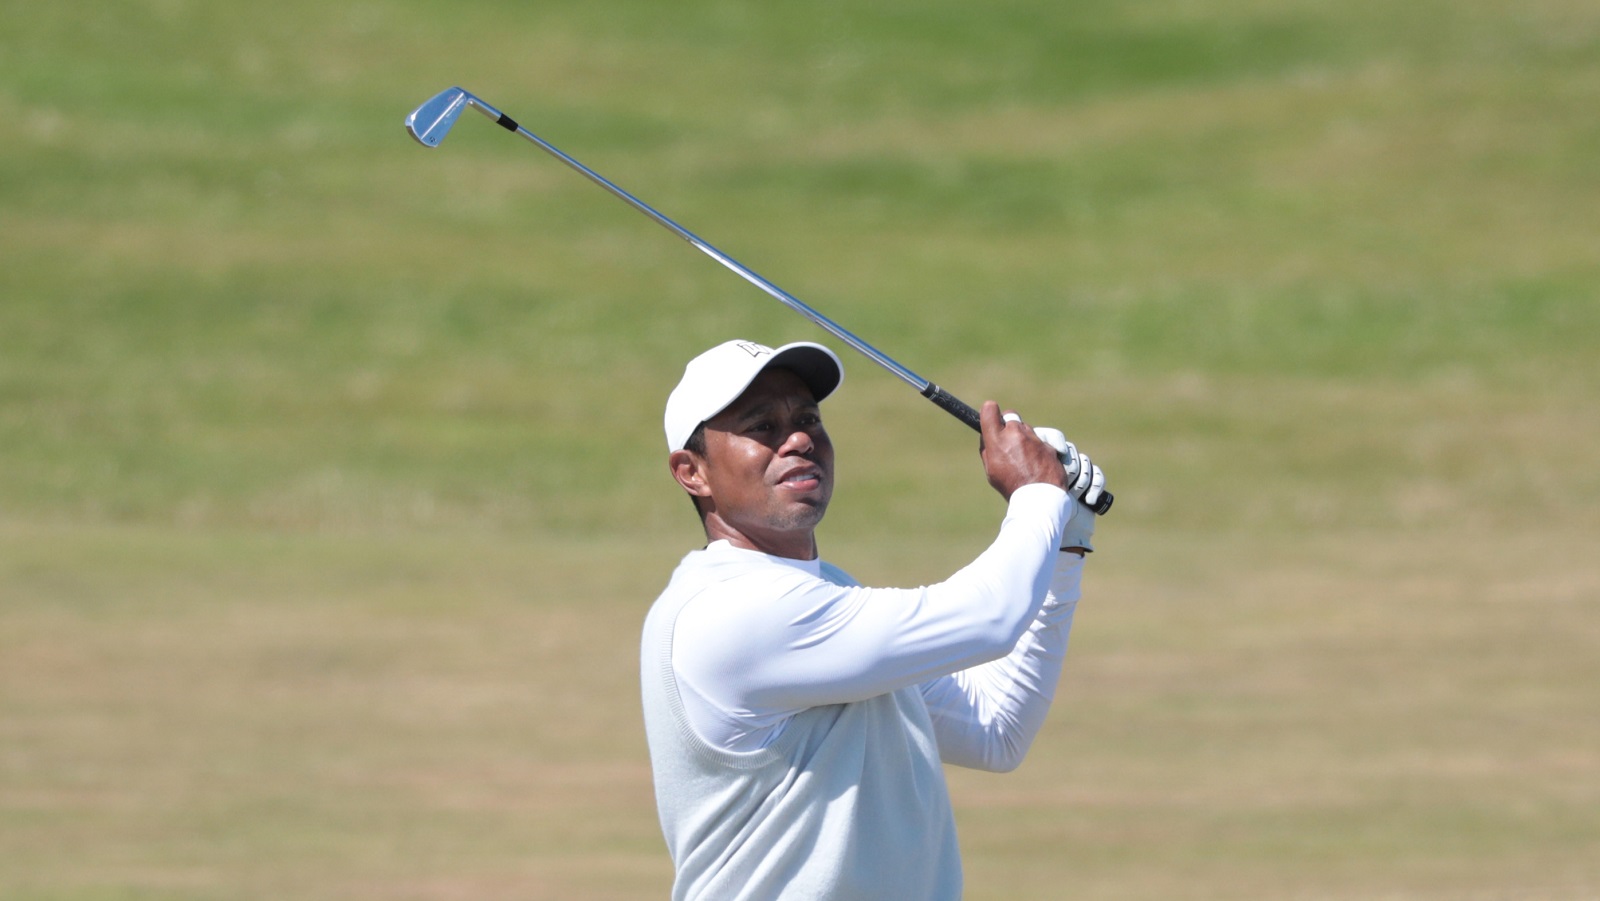 Tiger Woods plays a shot during the British Open at St. Andrews Old Course on July 15, 2022.